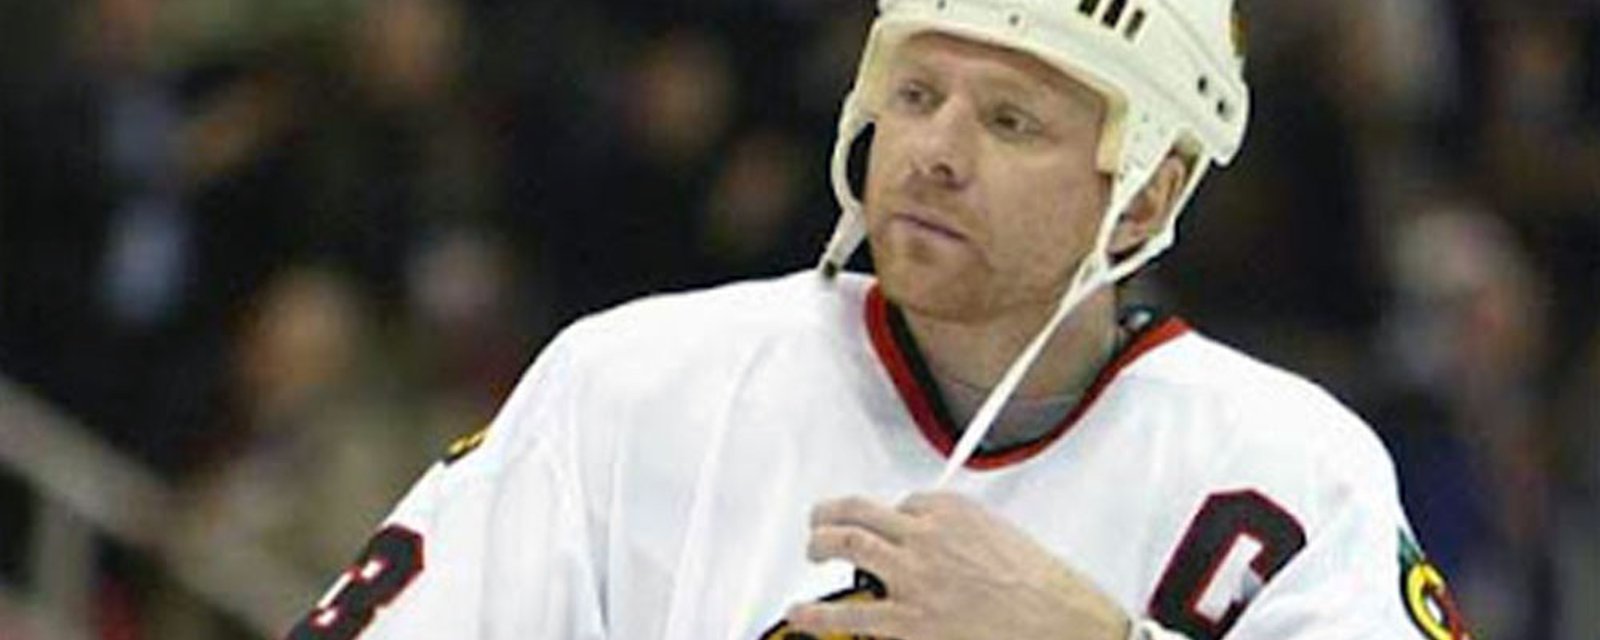 Former Blackhawks captain Alexei Zhamnov given the highest coaching position in Russian hockey